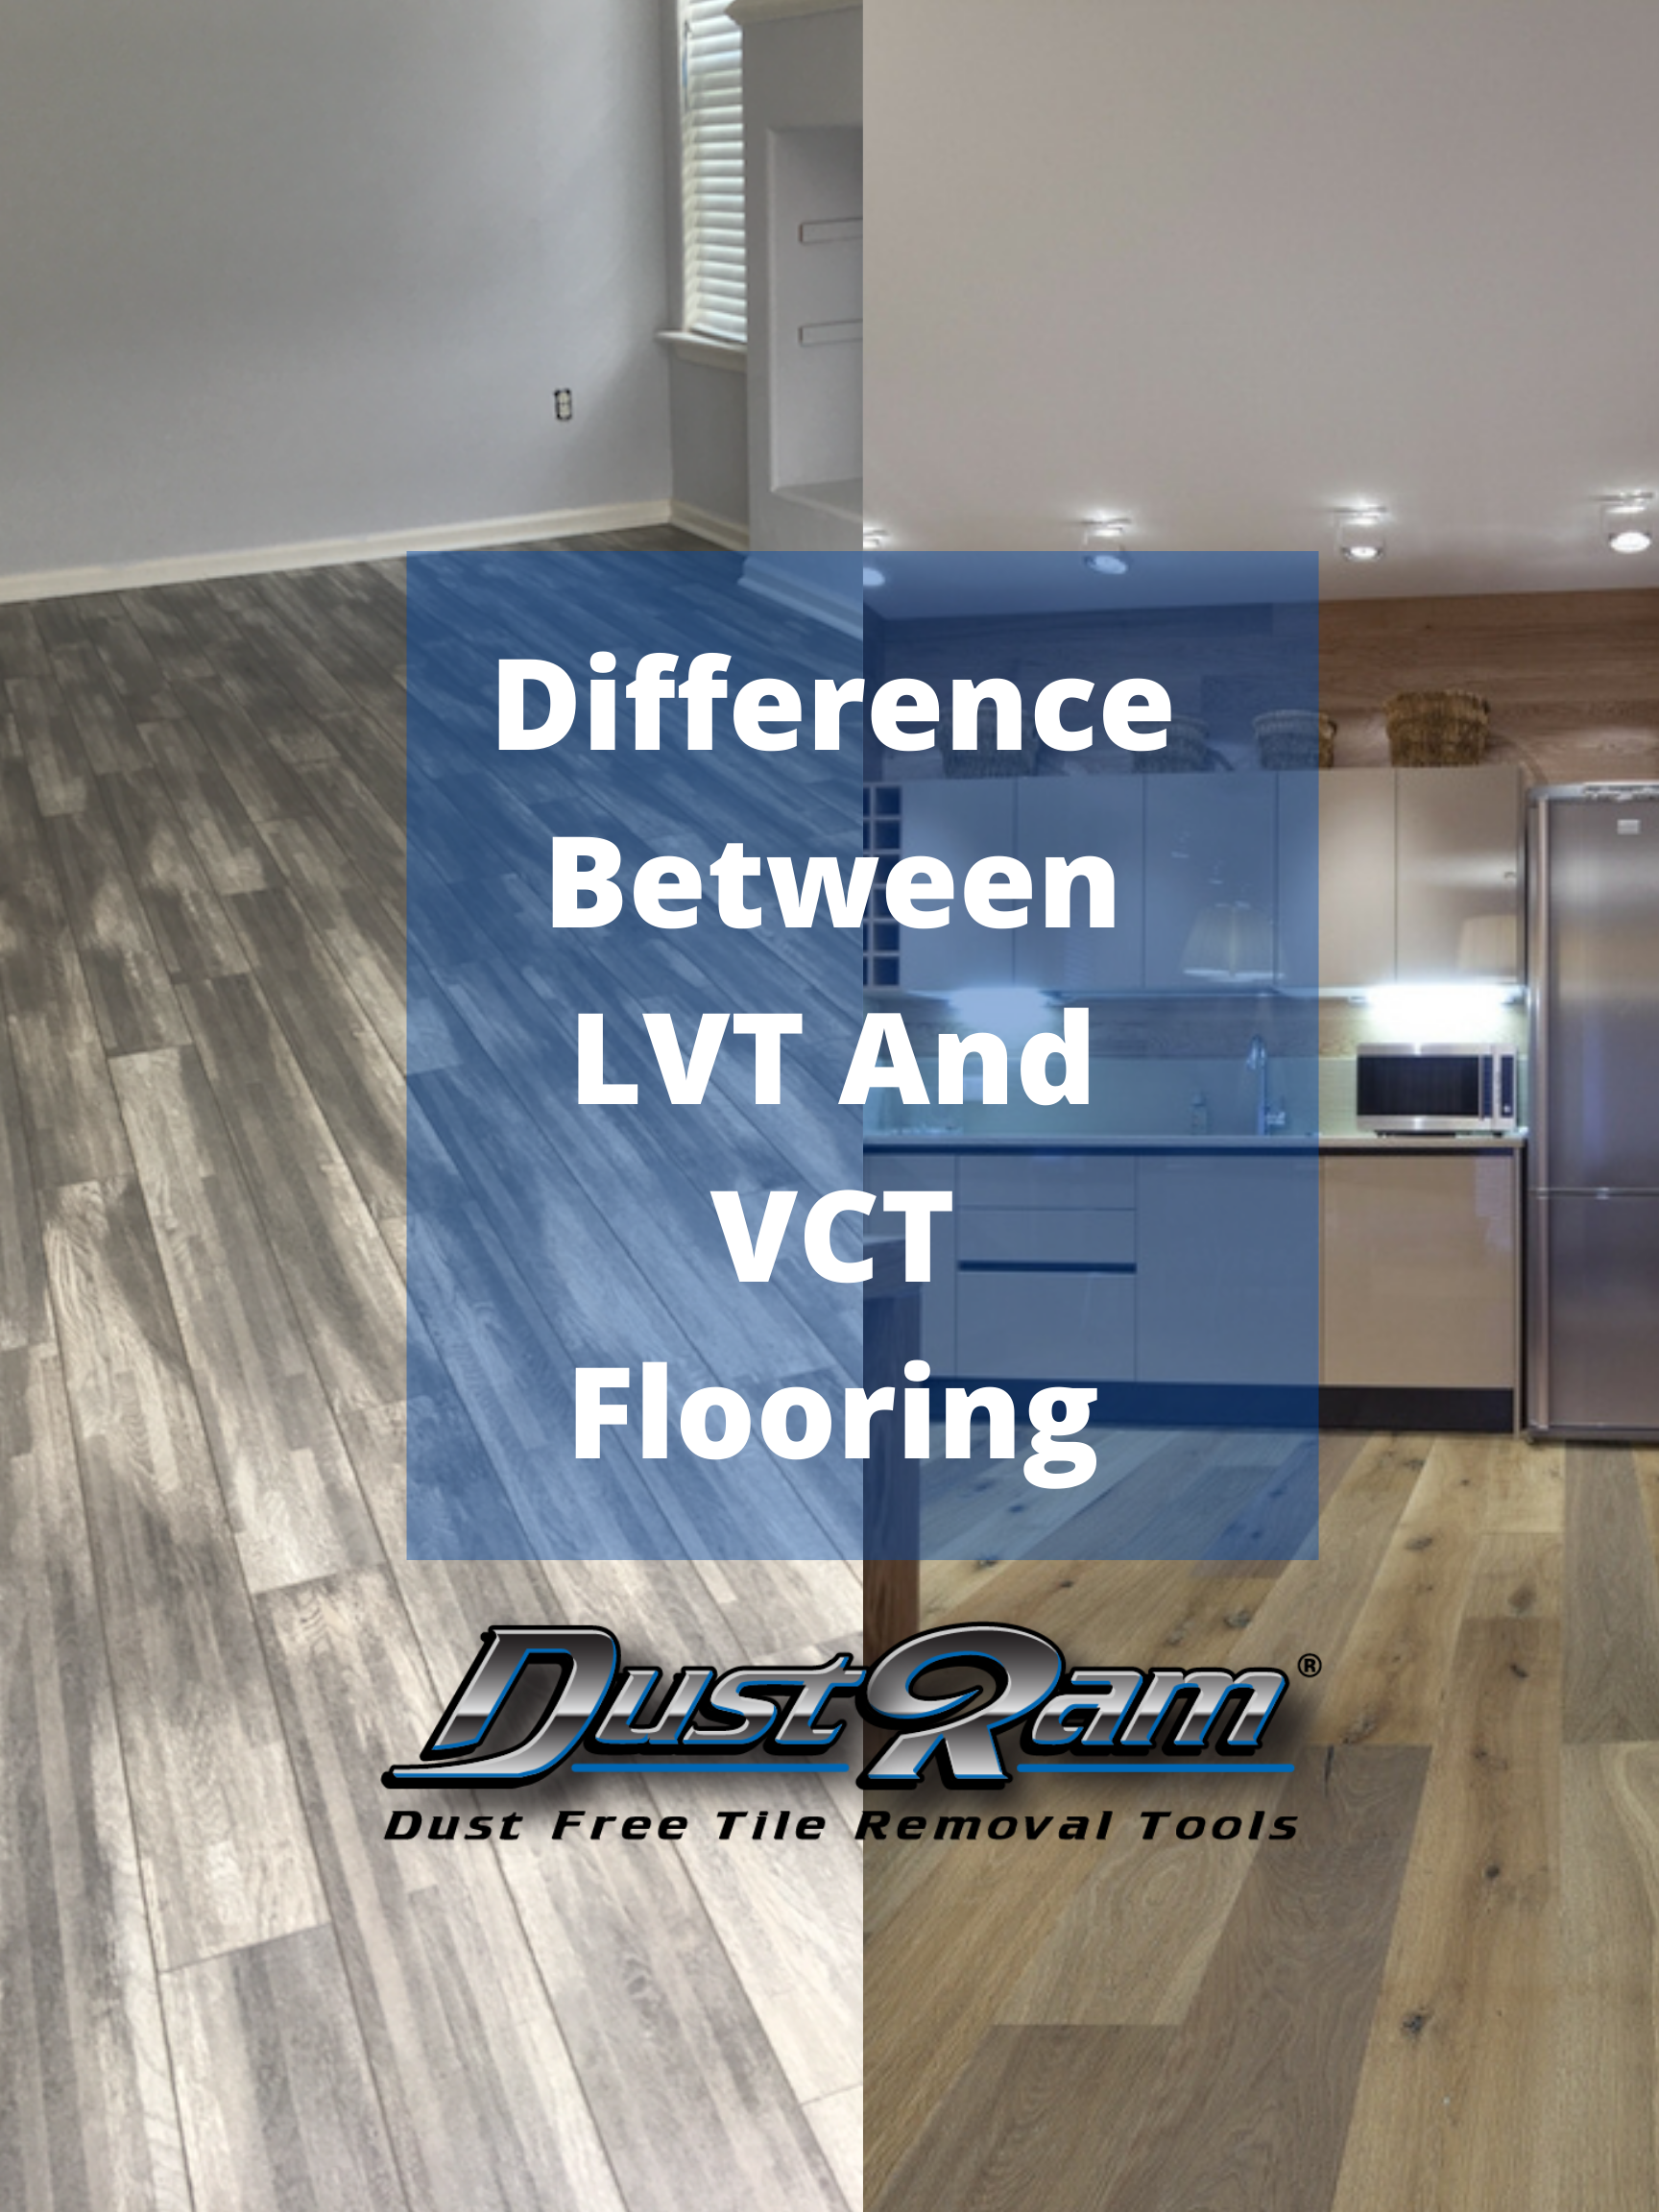 Difference Between LVT And VCT Flooring